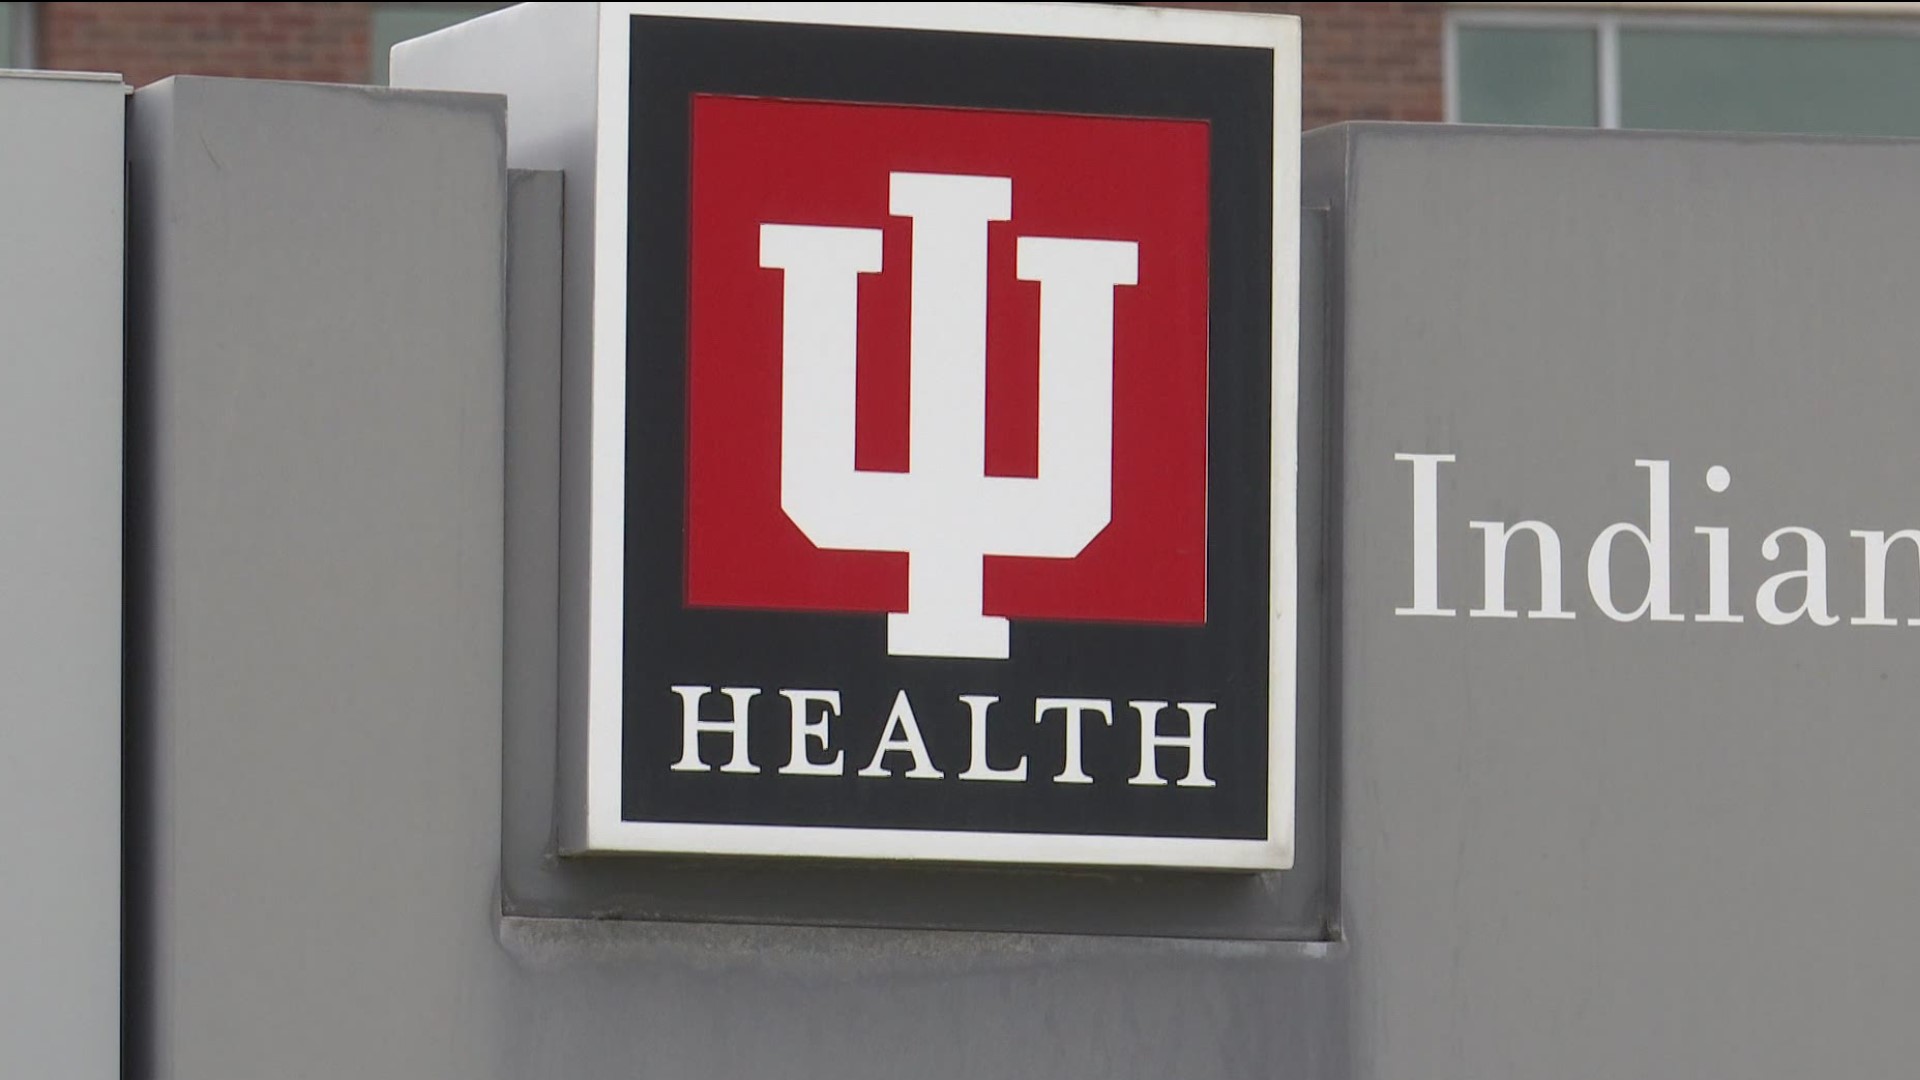 Riley Children's Hospital is the only IU Health hospital which did not request assistance.